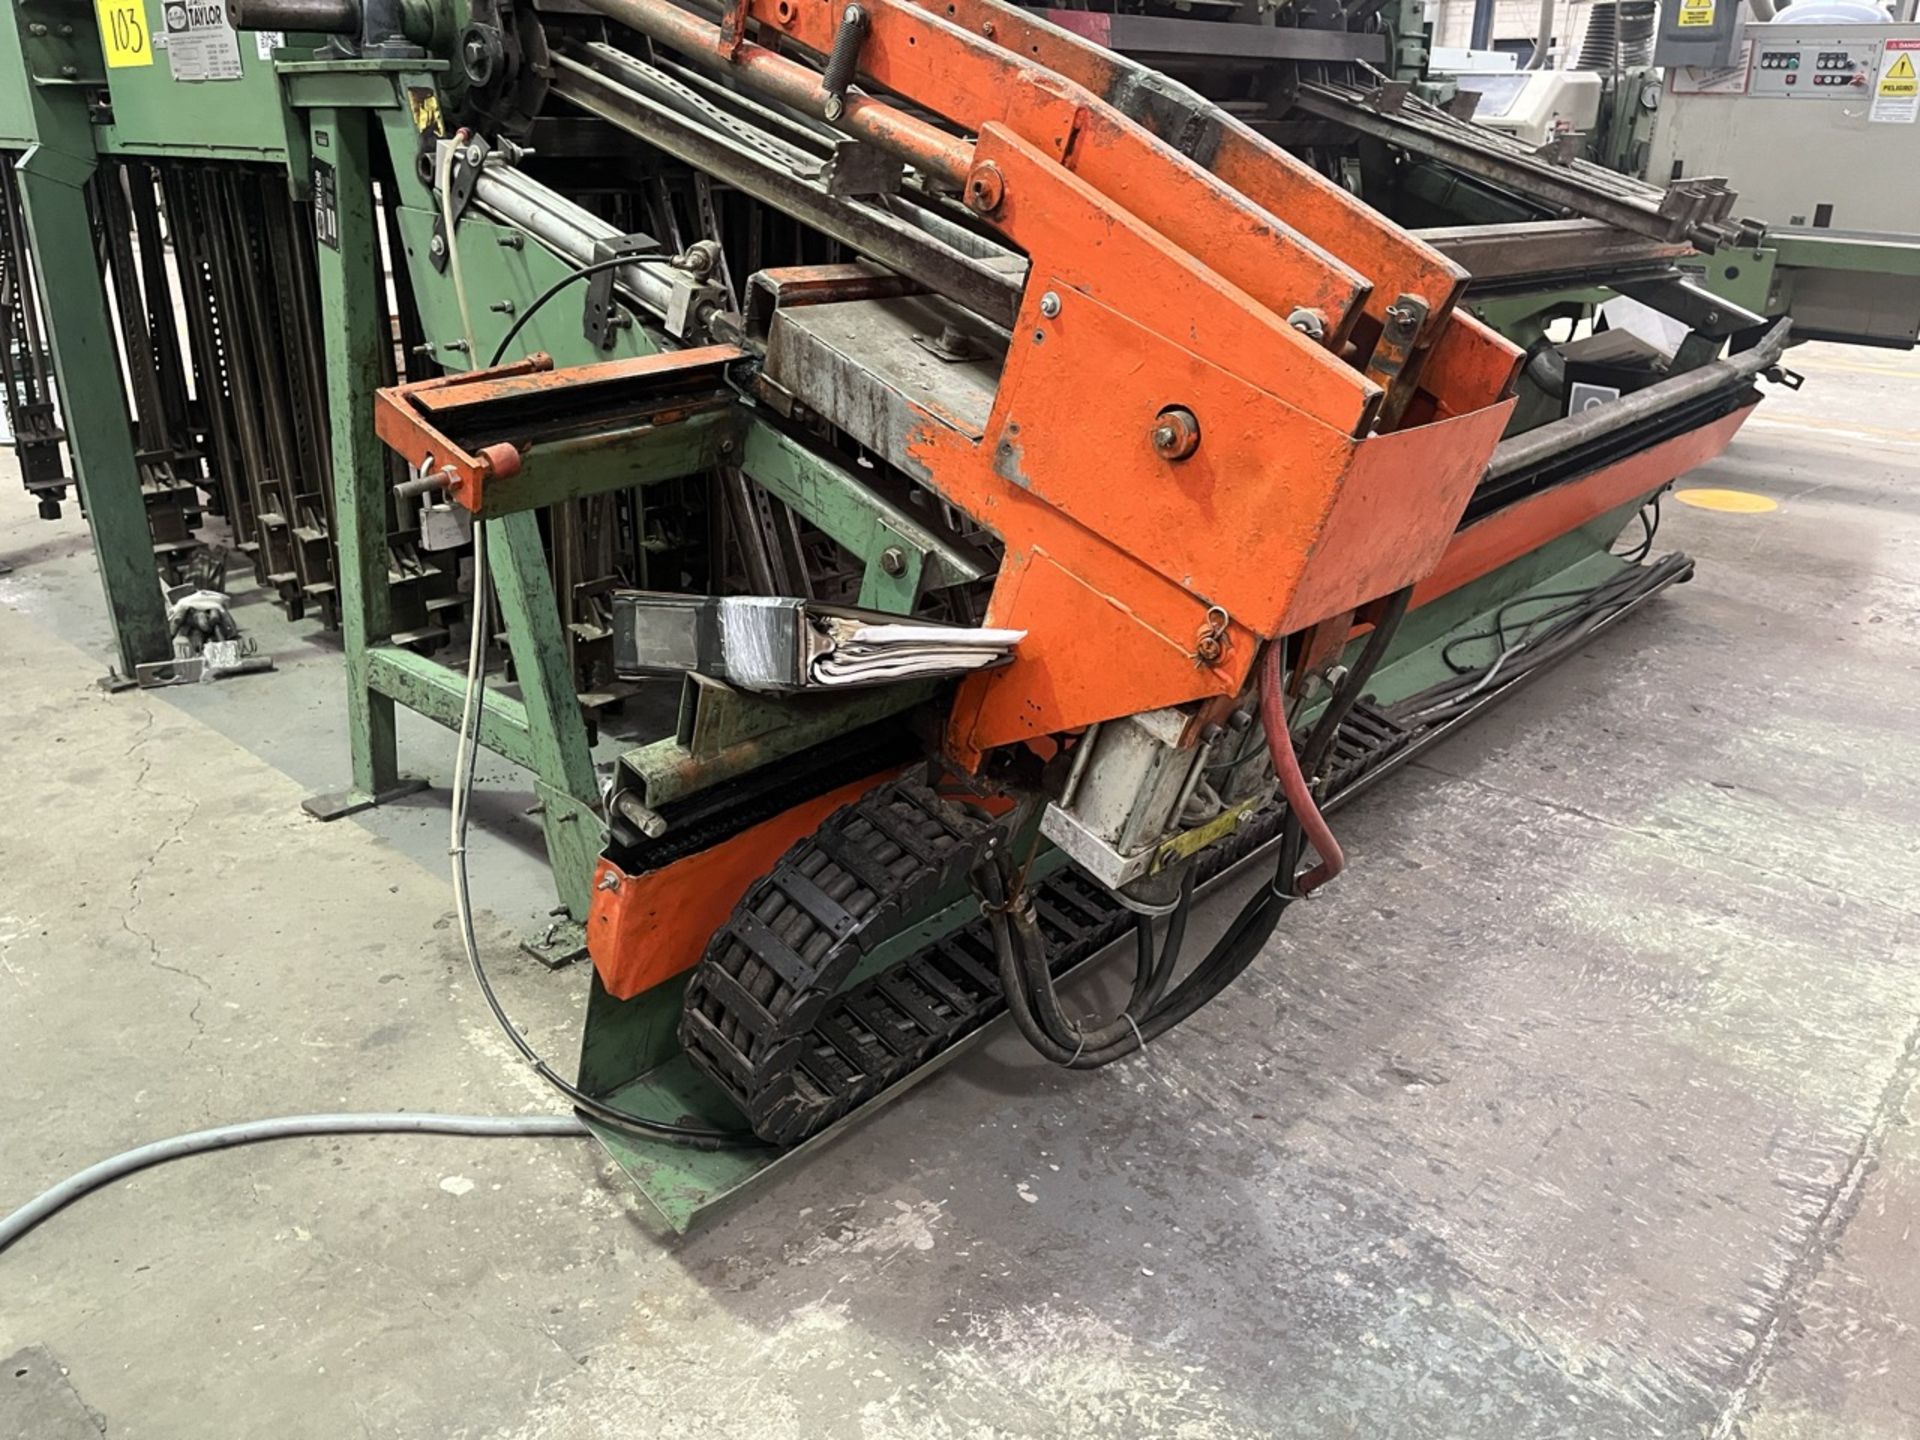 Taylor Octopus clamp holder and molder, Model 800169, Serial No. W493, Includes band to place the g - Image 9 of 12